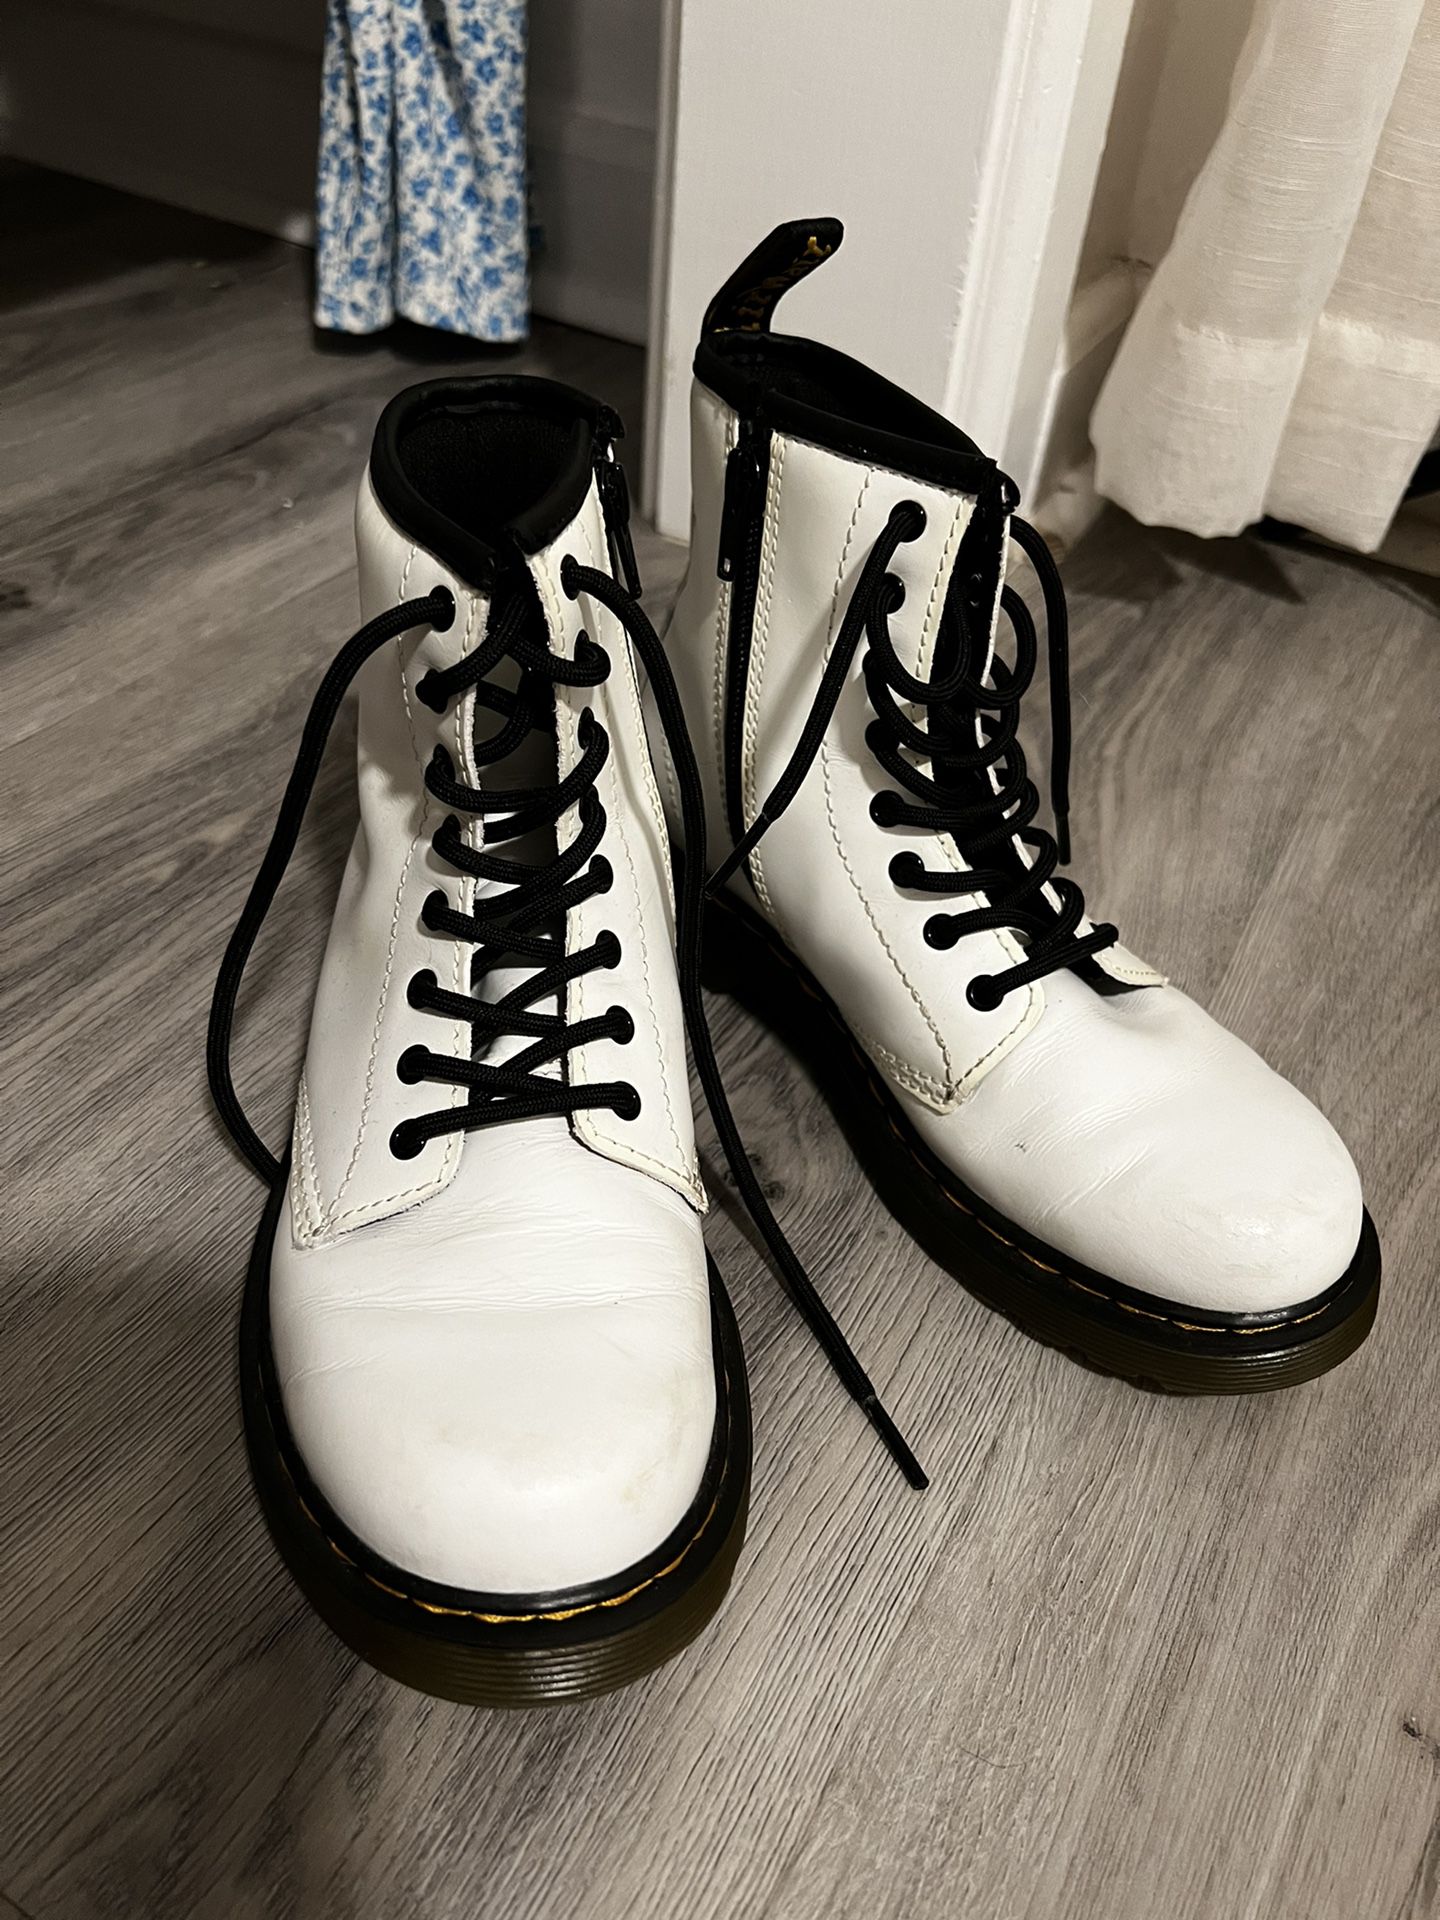 Dr. Martens Girls White Boots Size 3